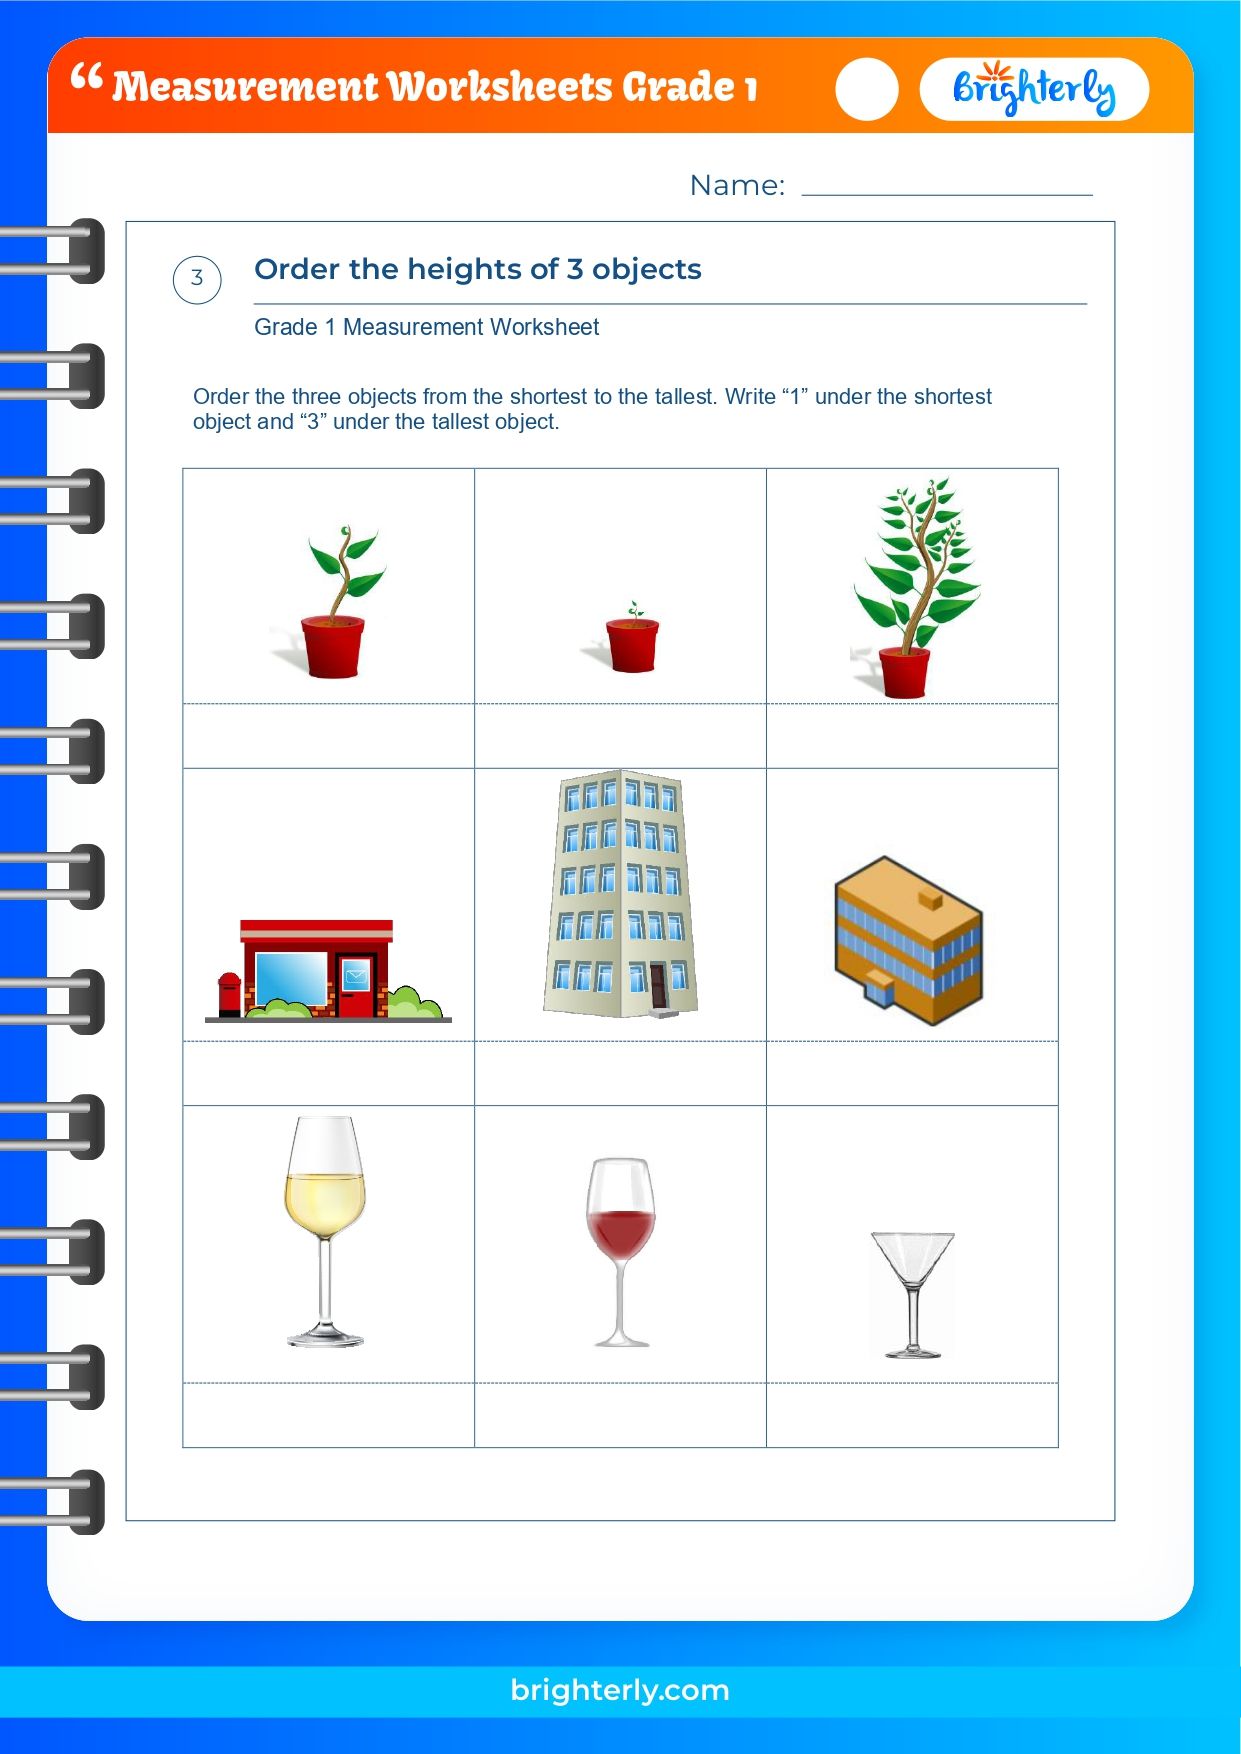 free-measurement-worksheets-for-grade-1-pdfs-brighterly